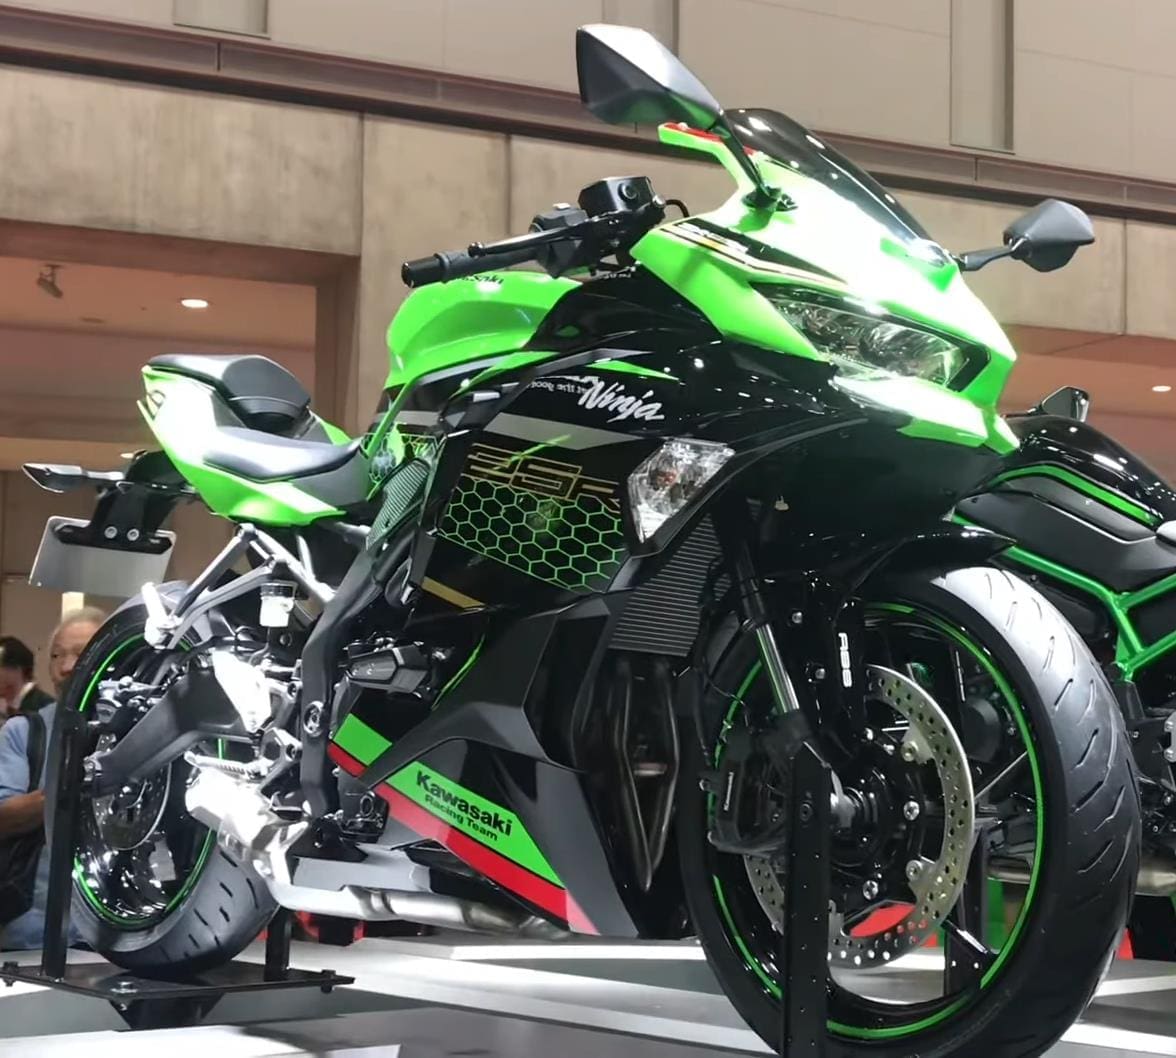 VIDEO: Listen up! Here’s the new Kawasaki Ninja ZX-25R motorcycle running to its 17,000rpm redline – LISTEN to this thing…